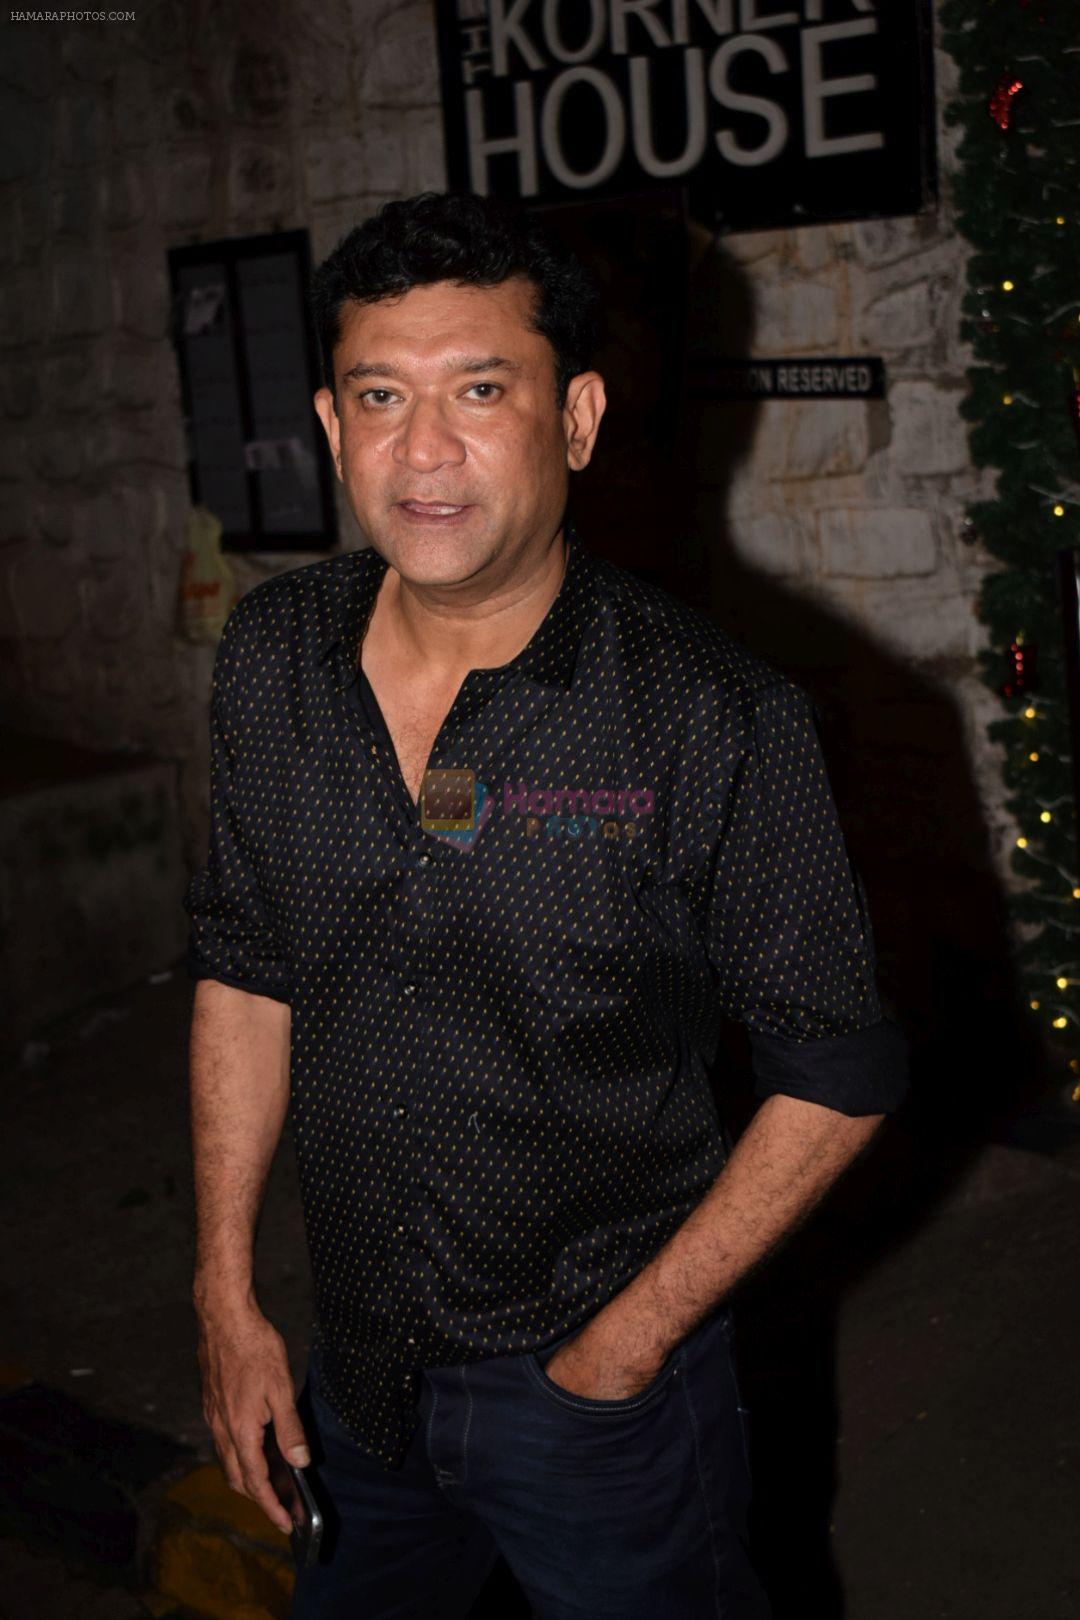 Ken Ghosh at Richa Chadda's party in Korner house on 23rd Dec 2017